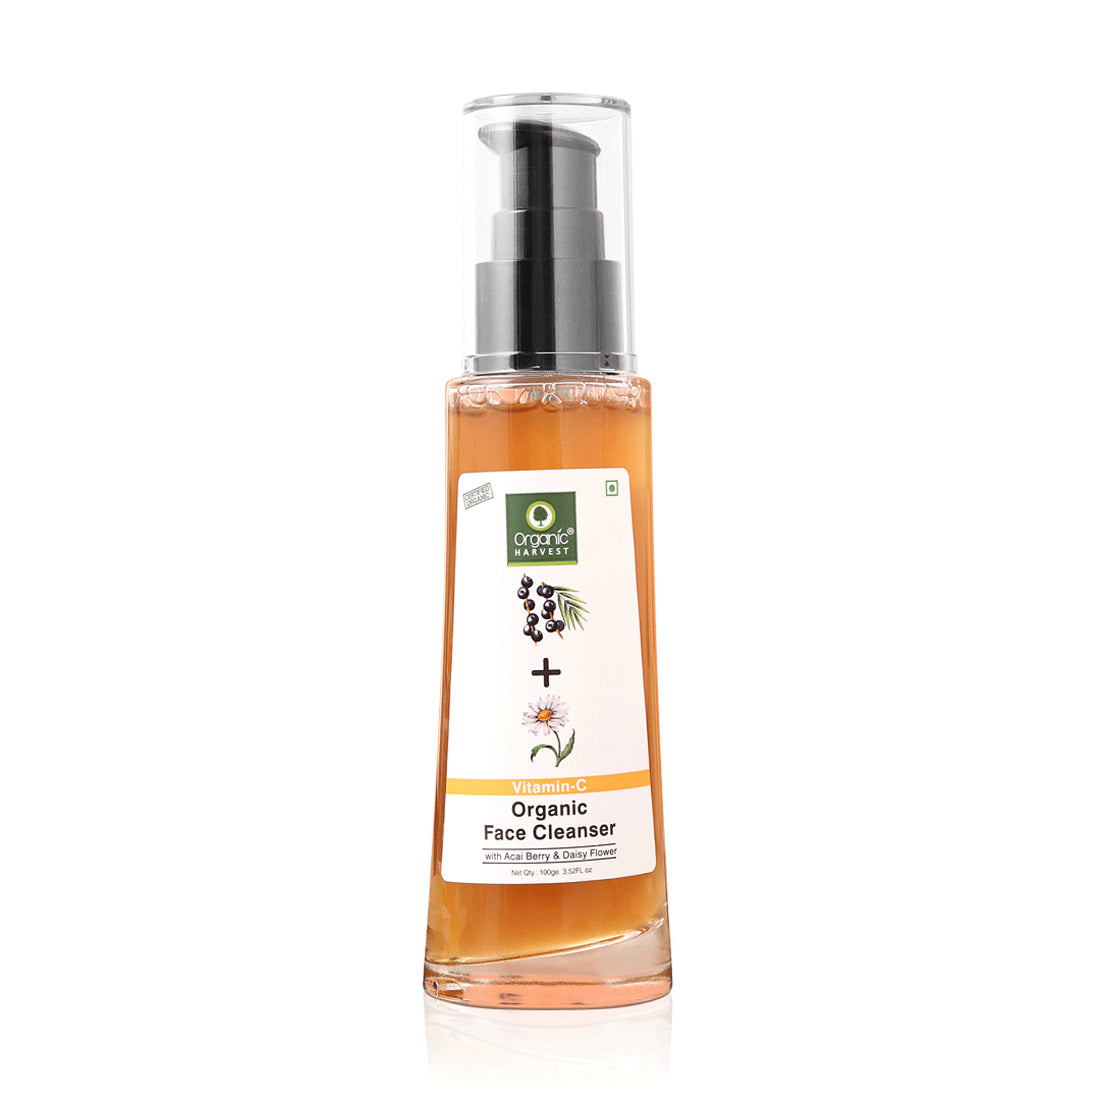 Brightening Face Cleanser: Kakadu Plum, Acai Berry & Rice Water | Face Wash for Oily Skin | Vitamin C Face Wash -150ml